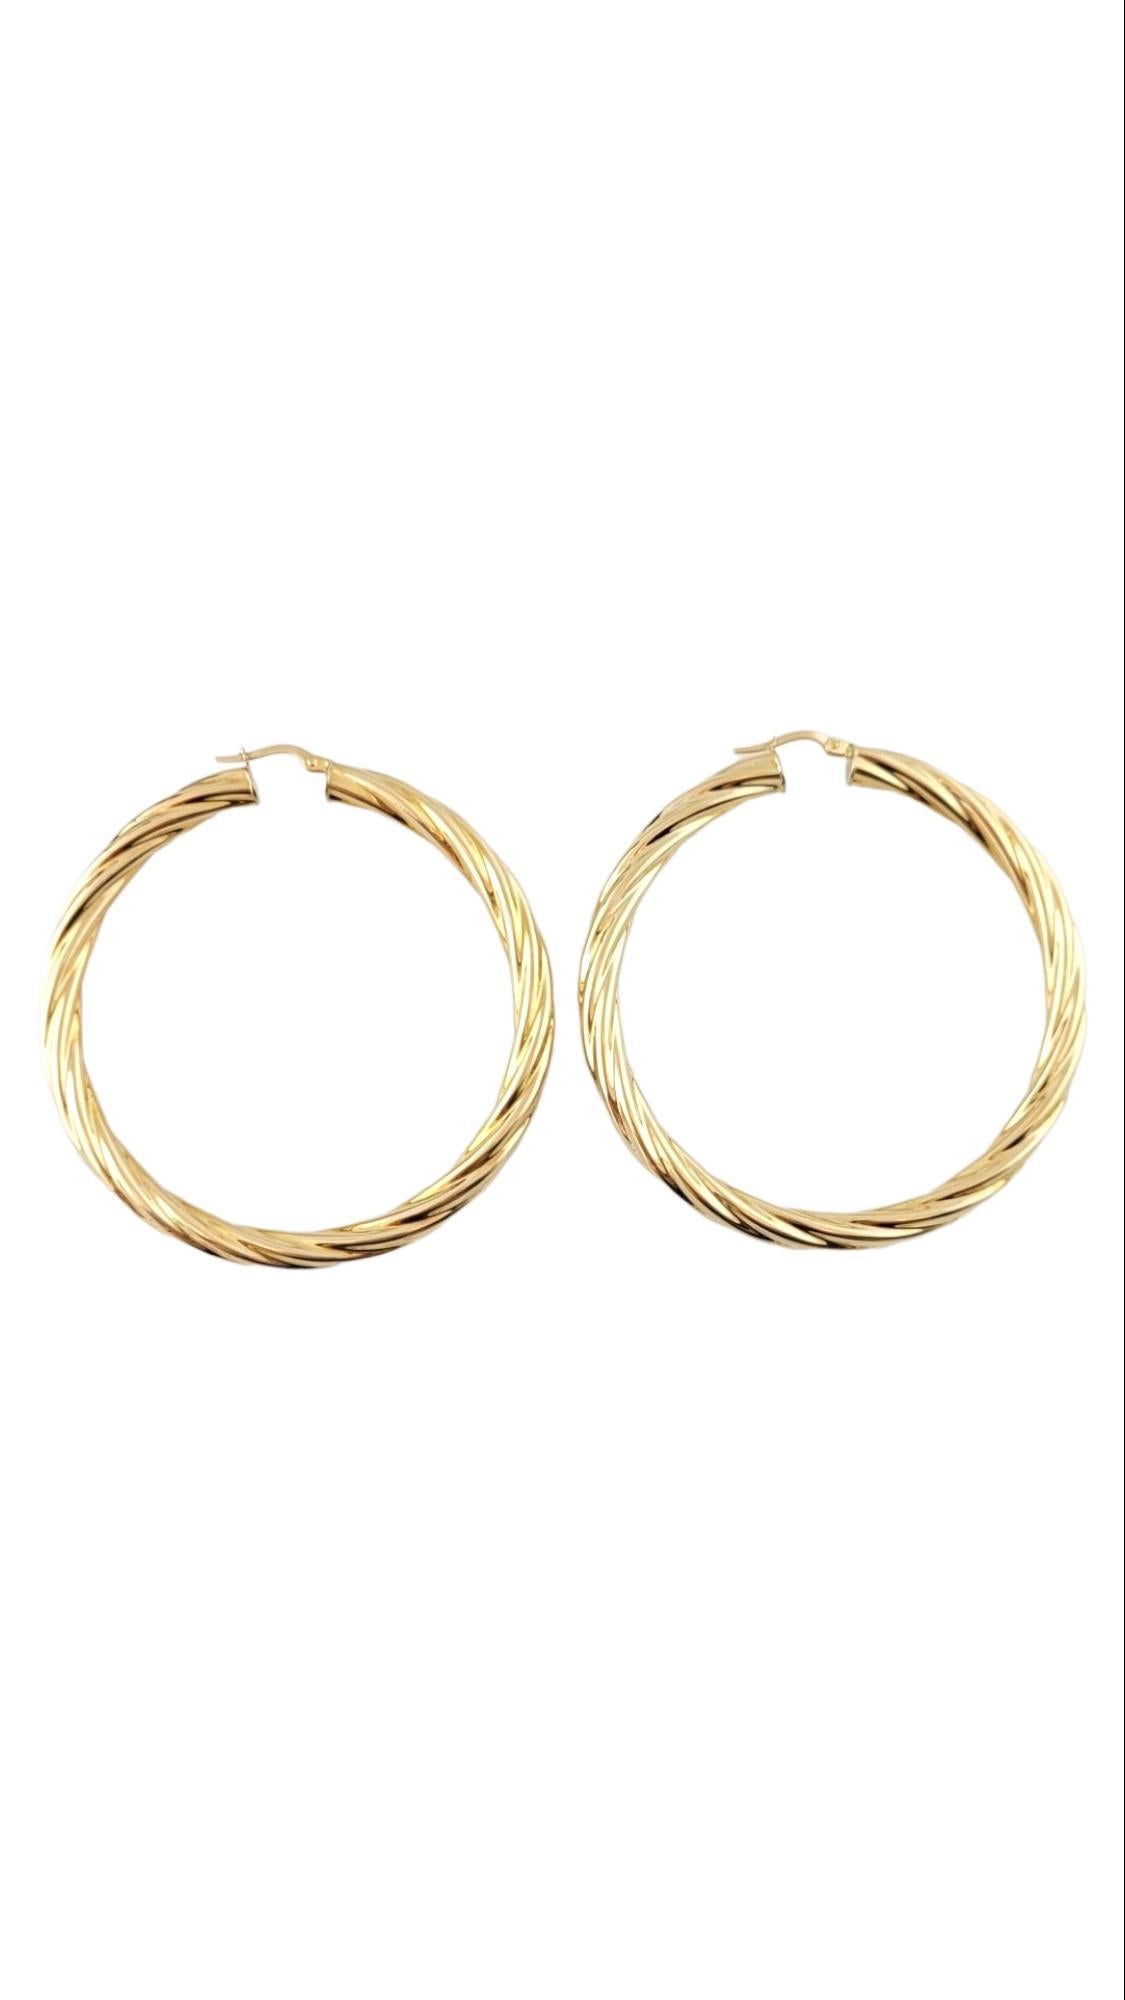 14K Yellow Gold Large Twisted Hoop Earrings

This gorgeous set of 14K gold hoop earrings have a beautiful, twisted design!

Size: 60.8mm X 59.2mm X 5.0mm

Weight: 9.47 g / 6.1 dwt

Hallmark: UNOAERRE 585

Very good condition, professionally